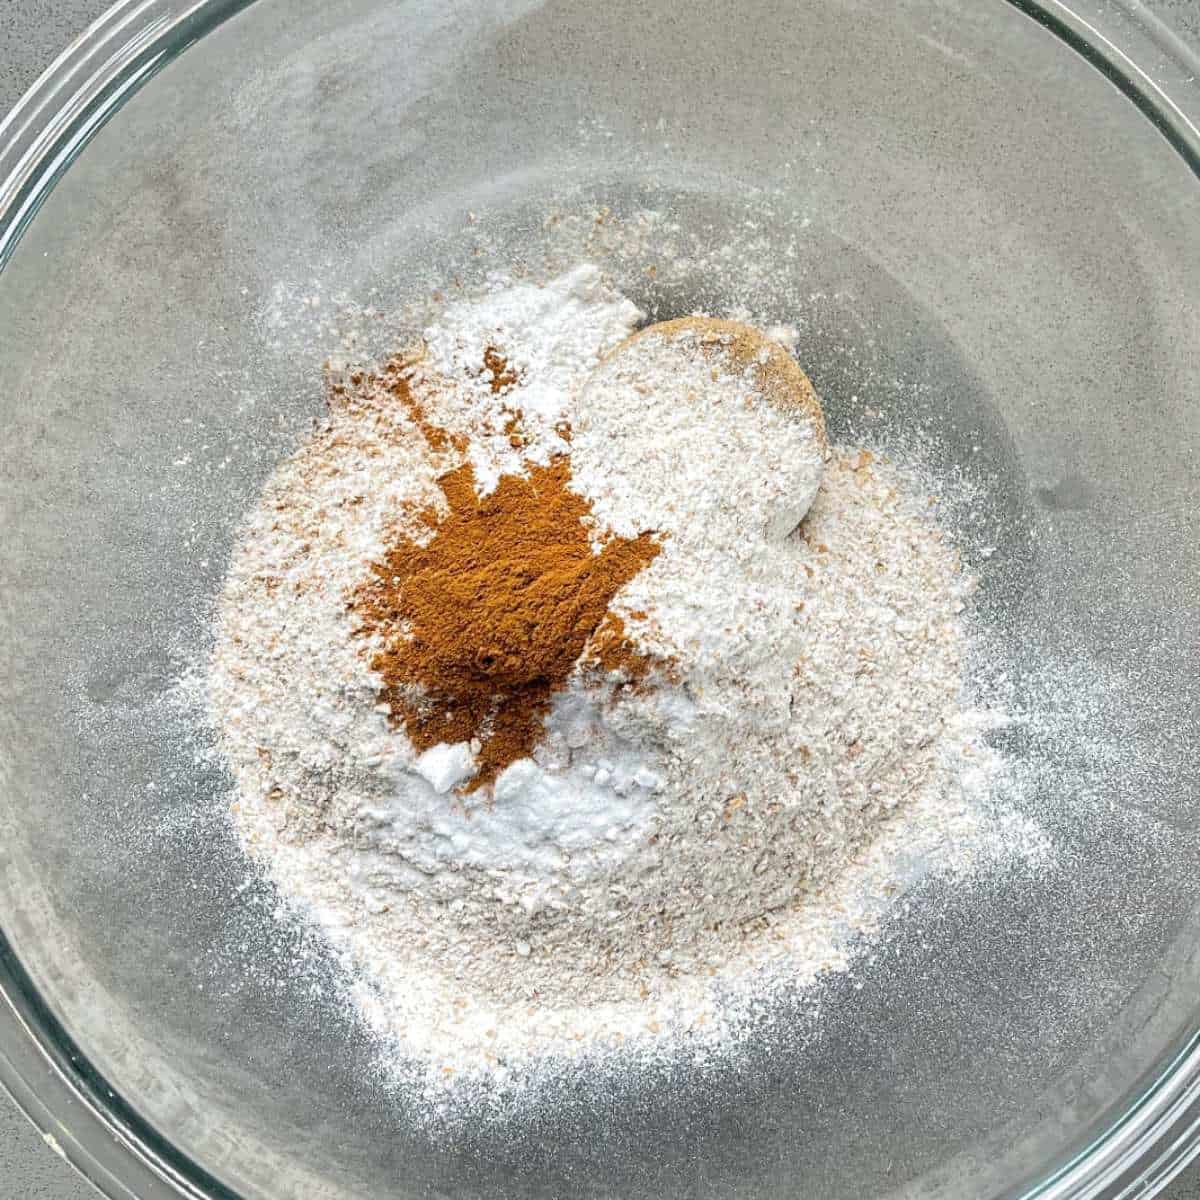 The dry ingredients for ABC Muffins in a glass bowl